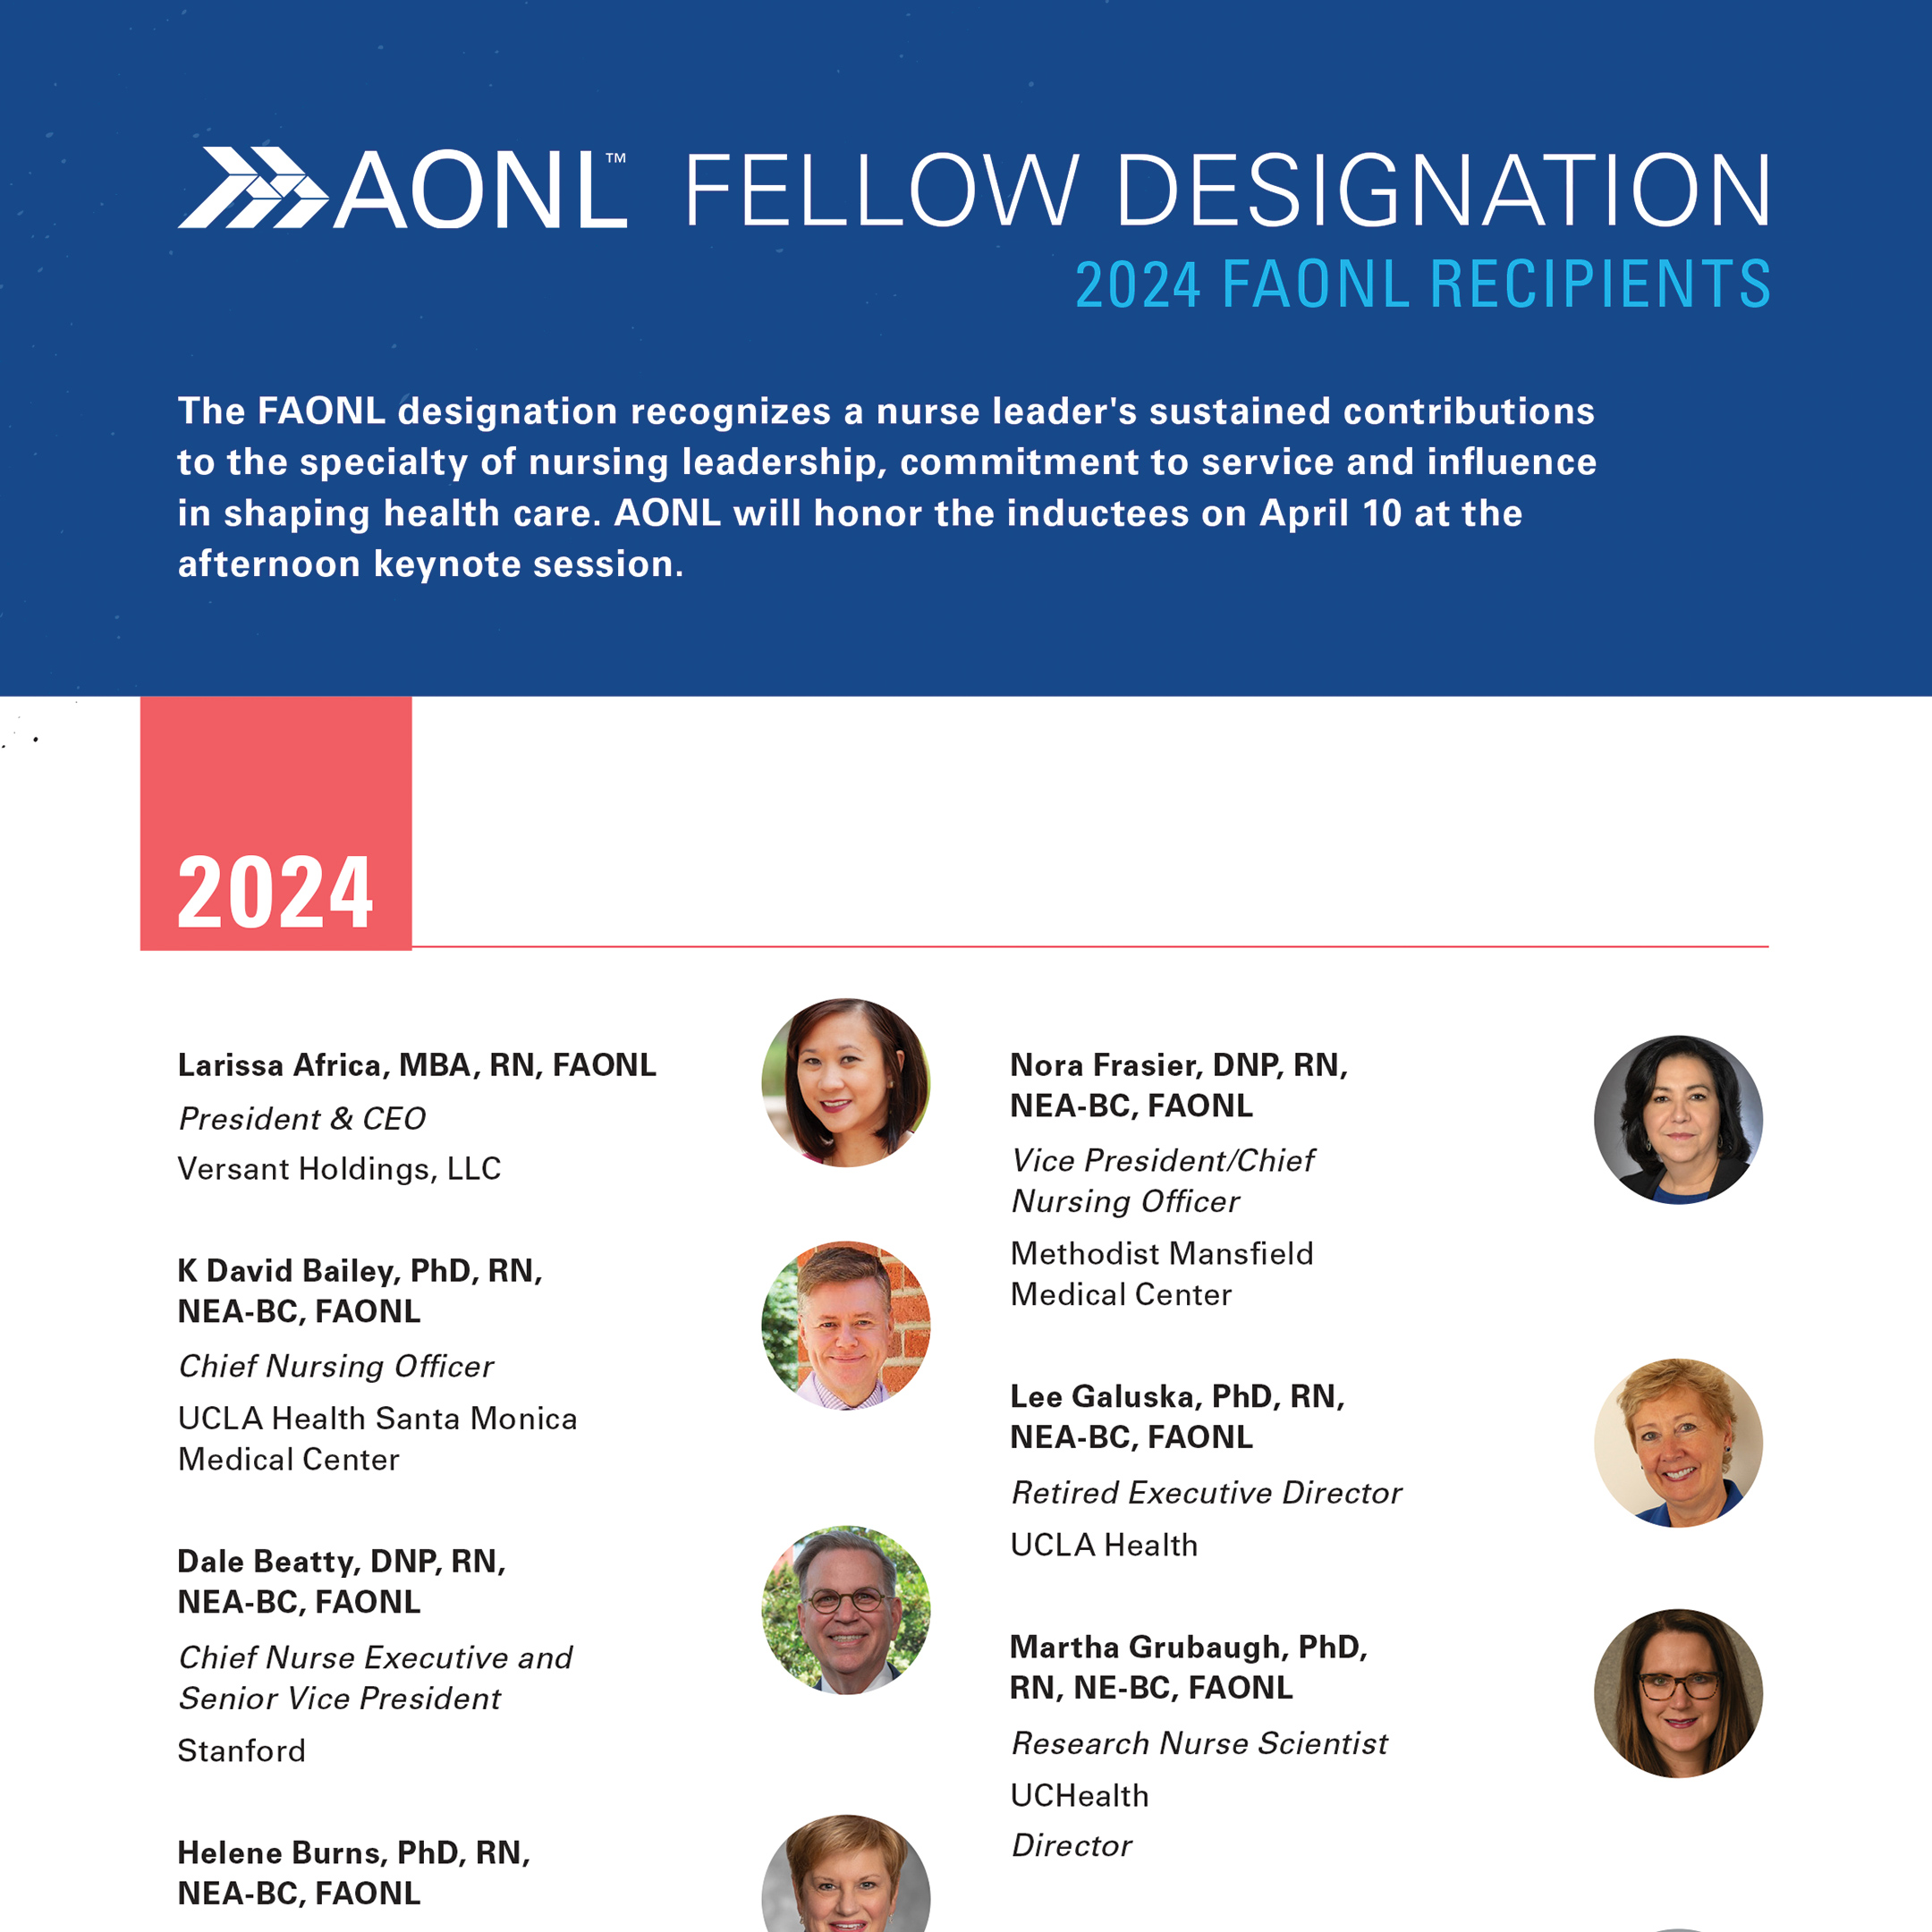 AONL 2024 Onsite Guide Conference Page Design by Hughes Design